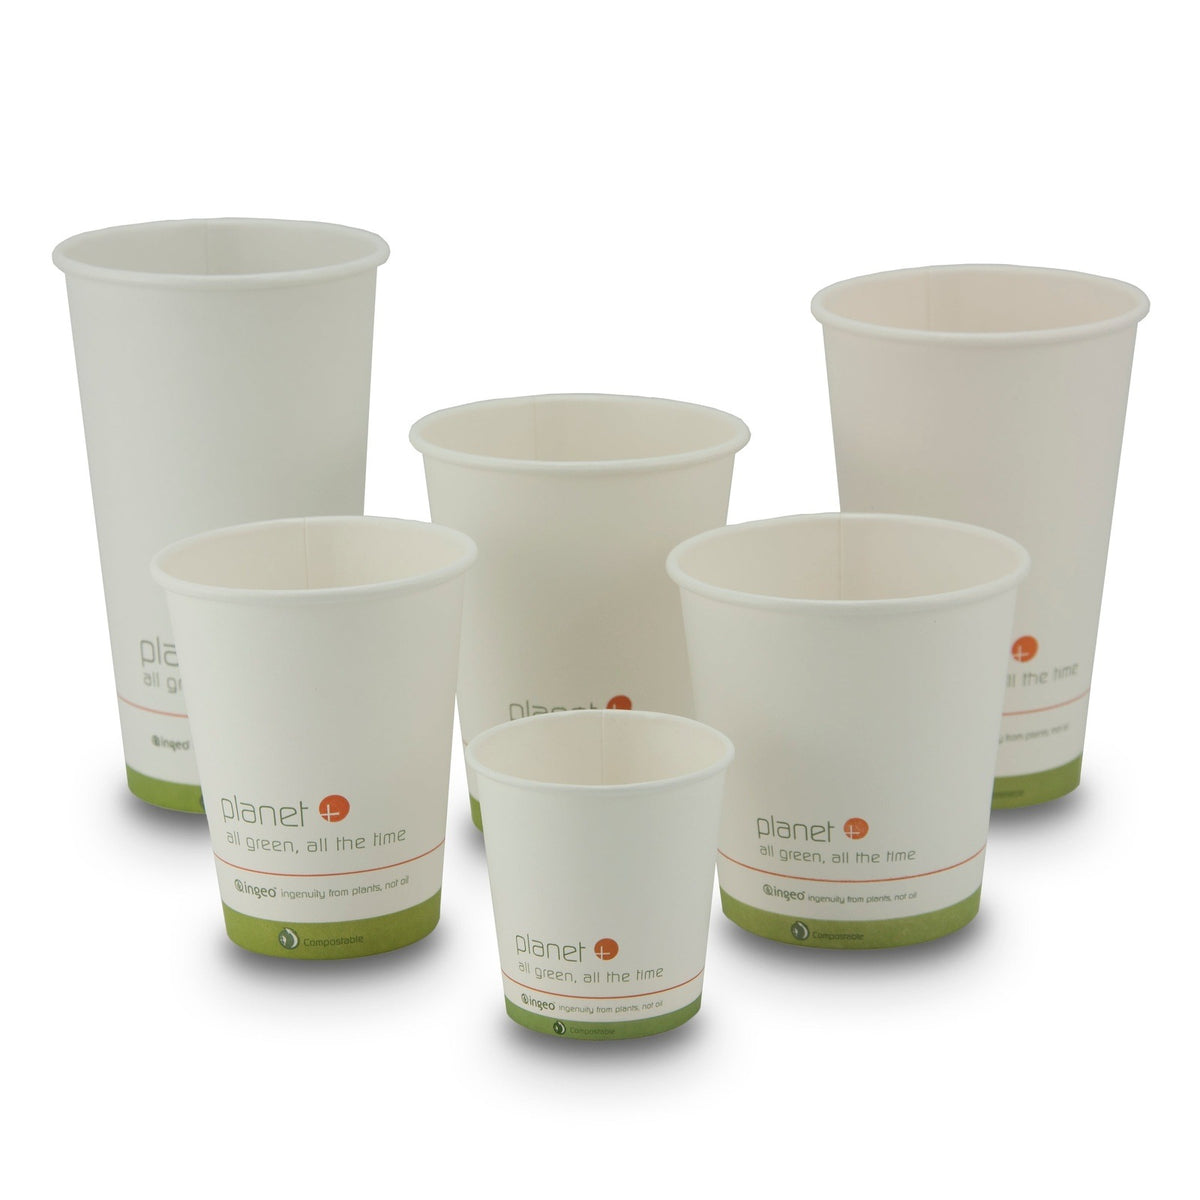 GREENER SETTINGS 16 oz. Clear Compostable Disposable Cups, Cold